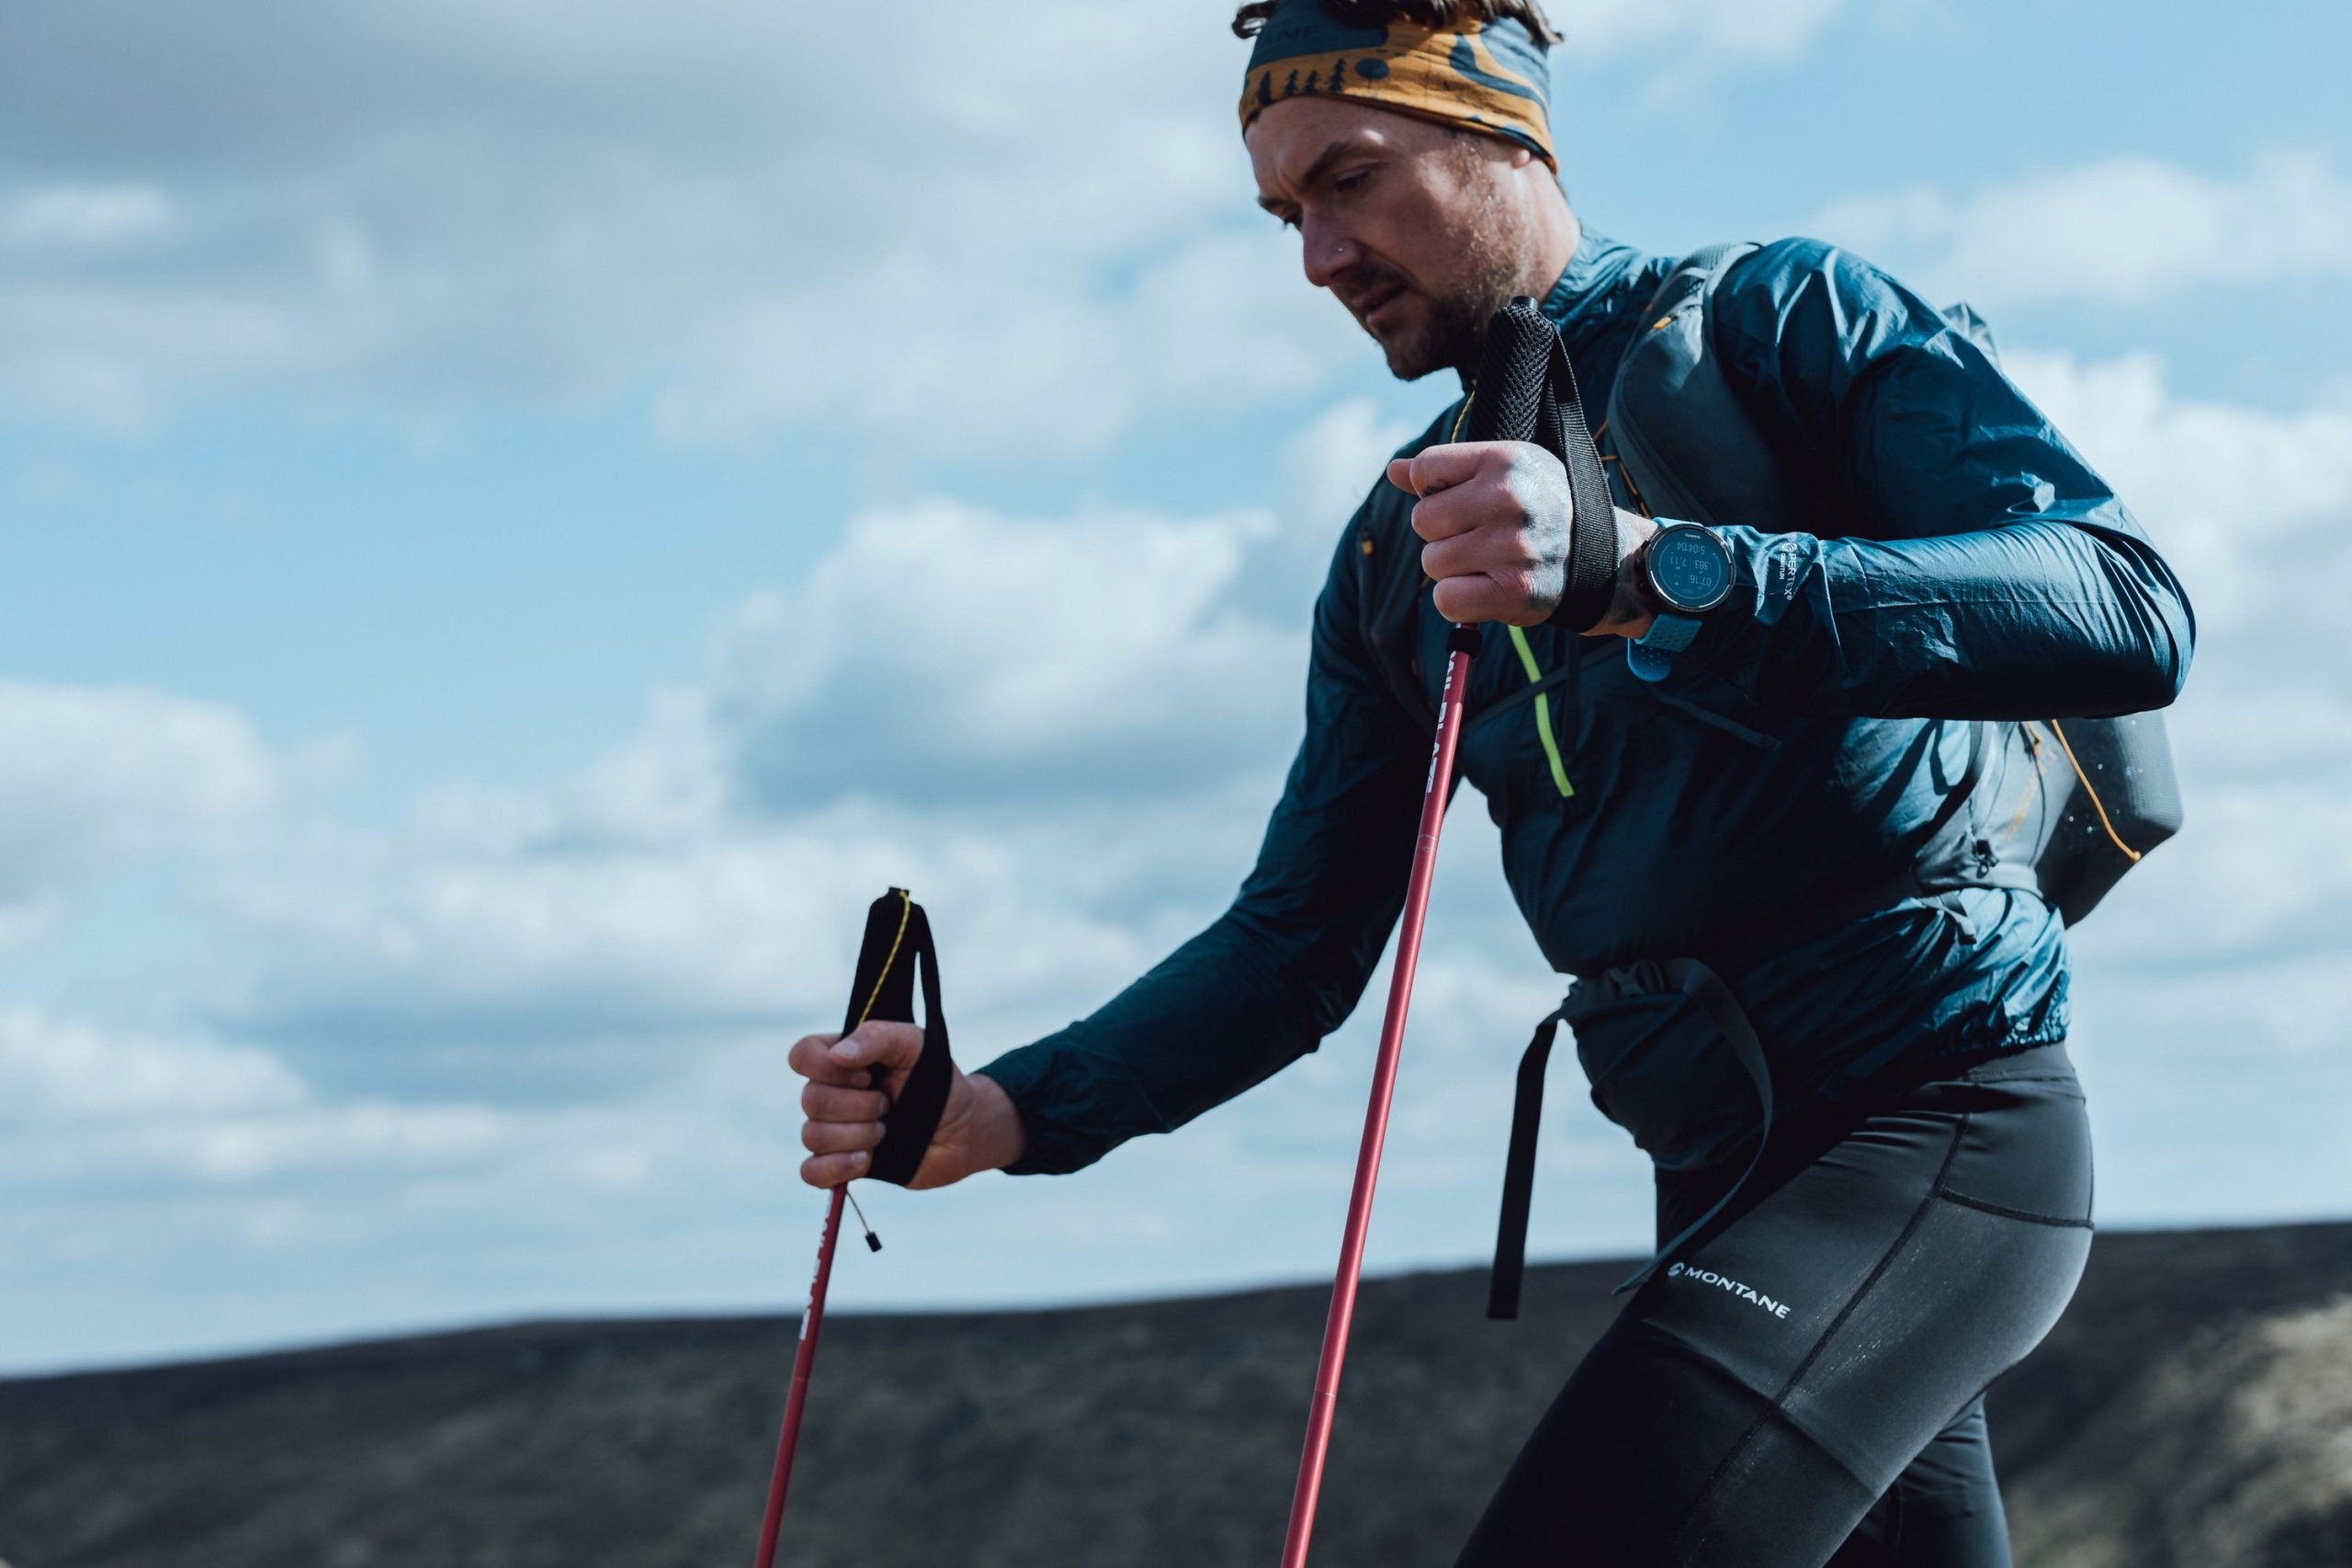 win Montane adventure gear worth up to £120